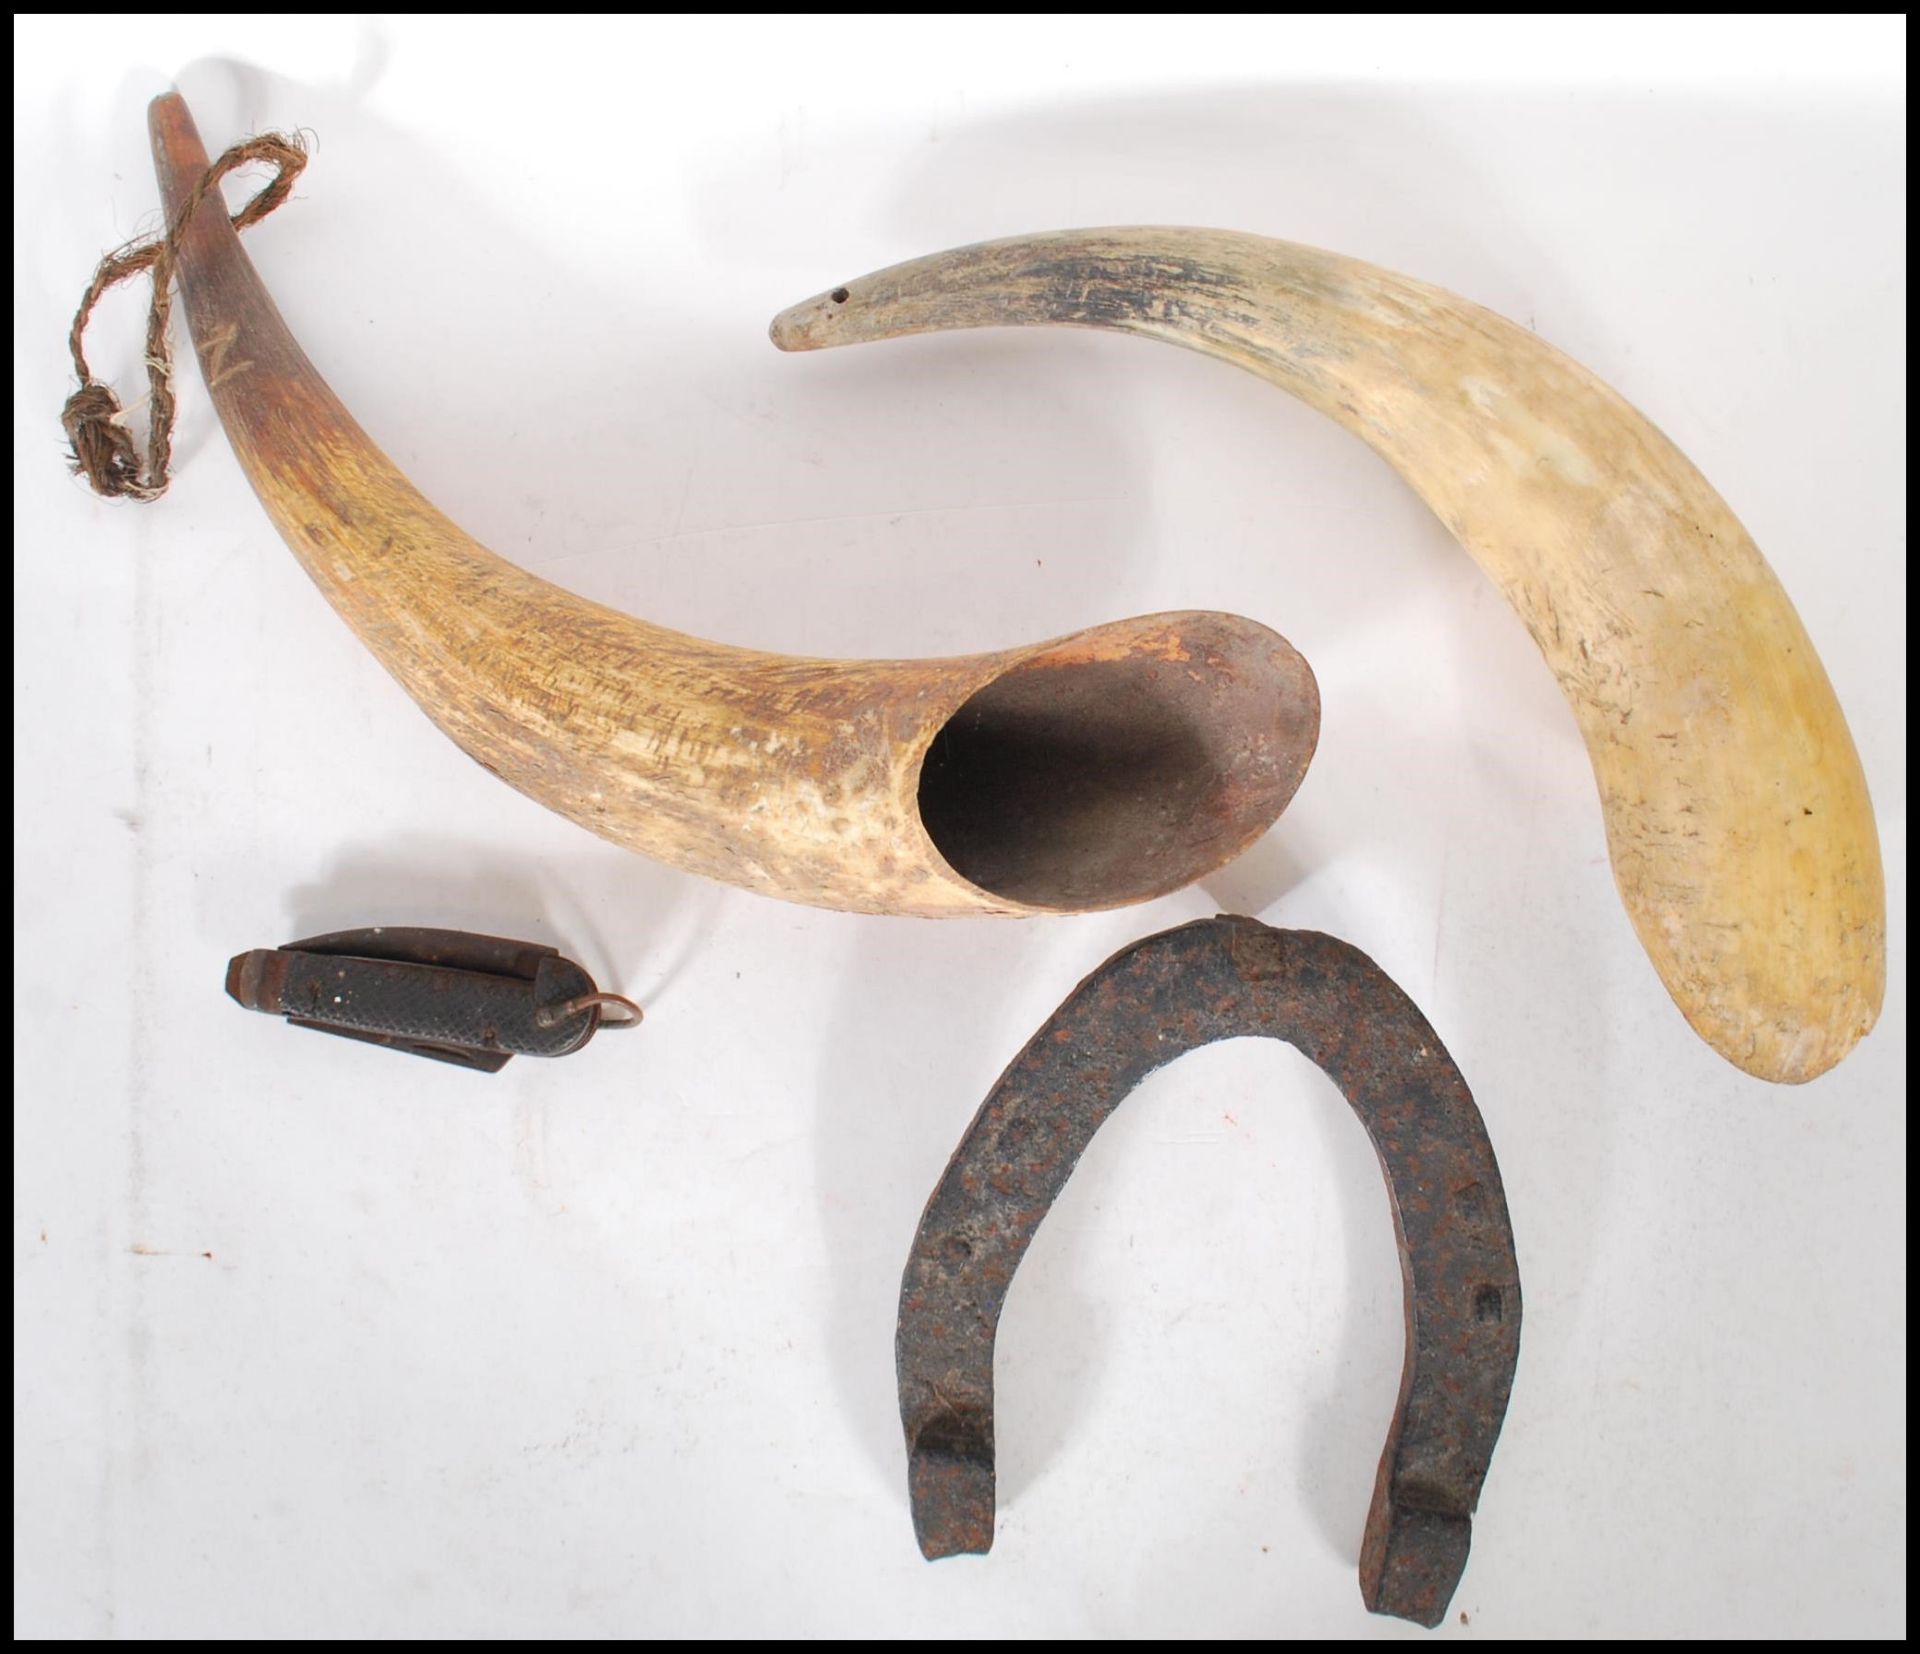 ANIMAL related antique collectables. Pair of large cow horns (possibly used as farm scoops for